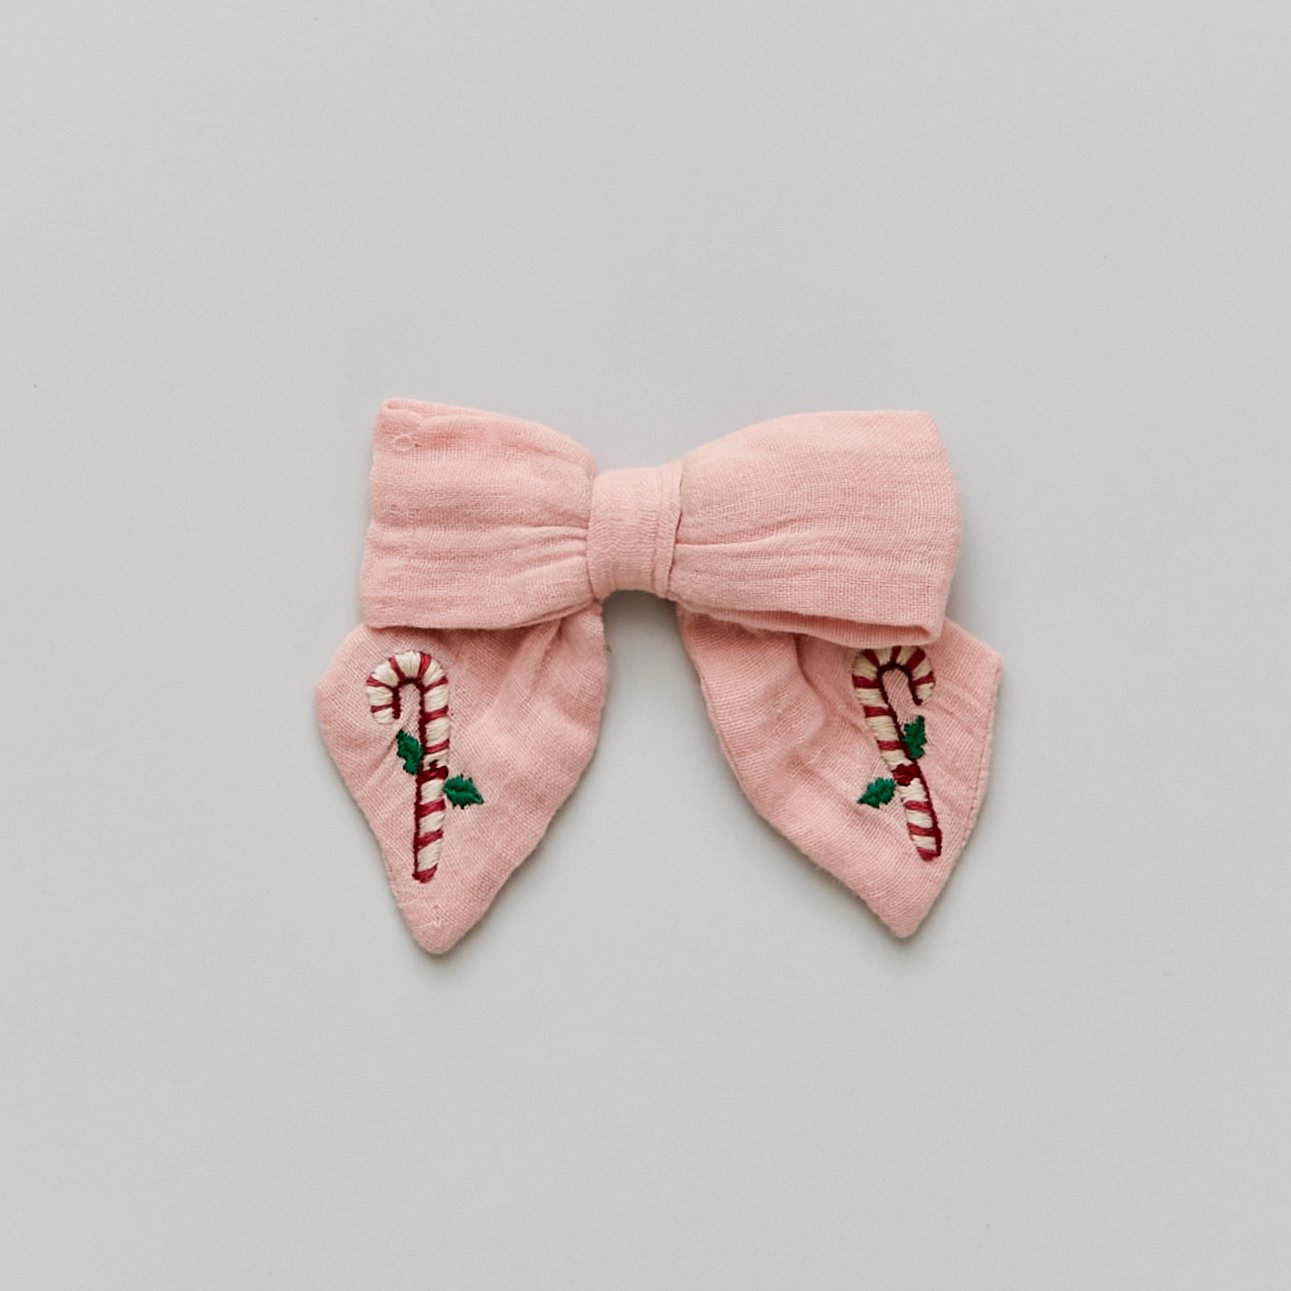 Strawberry Cream With Candy Cane Embroidery Holiday Bow